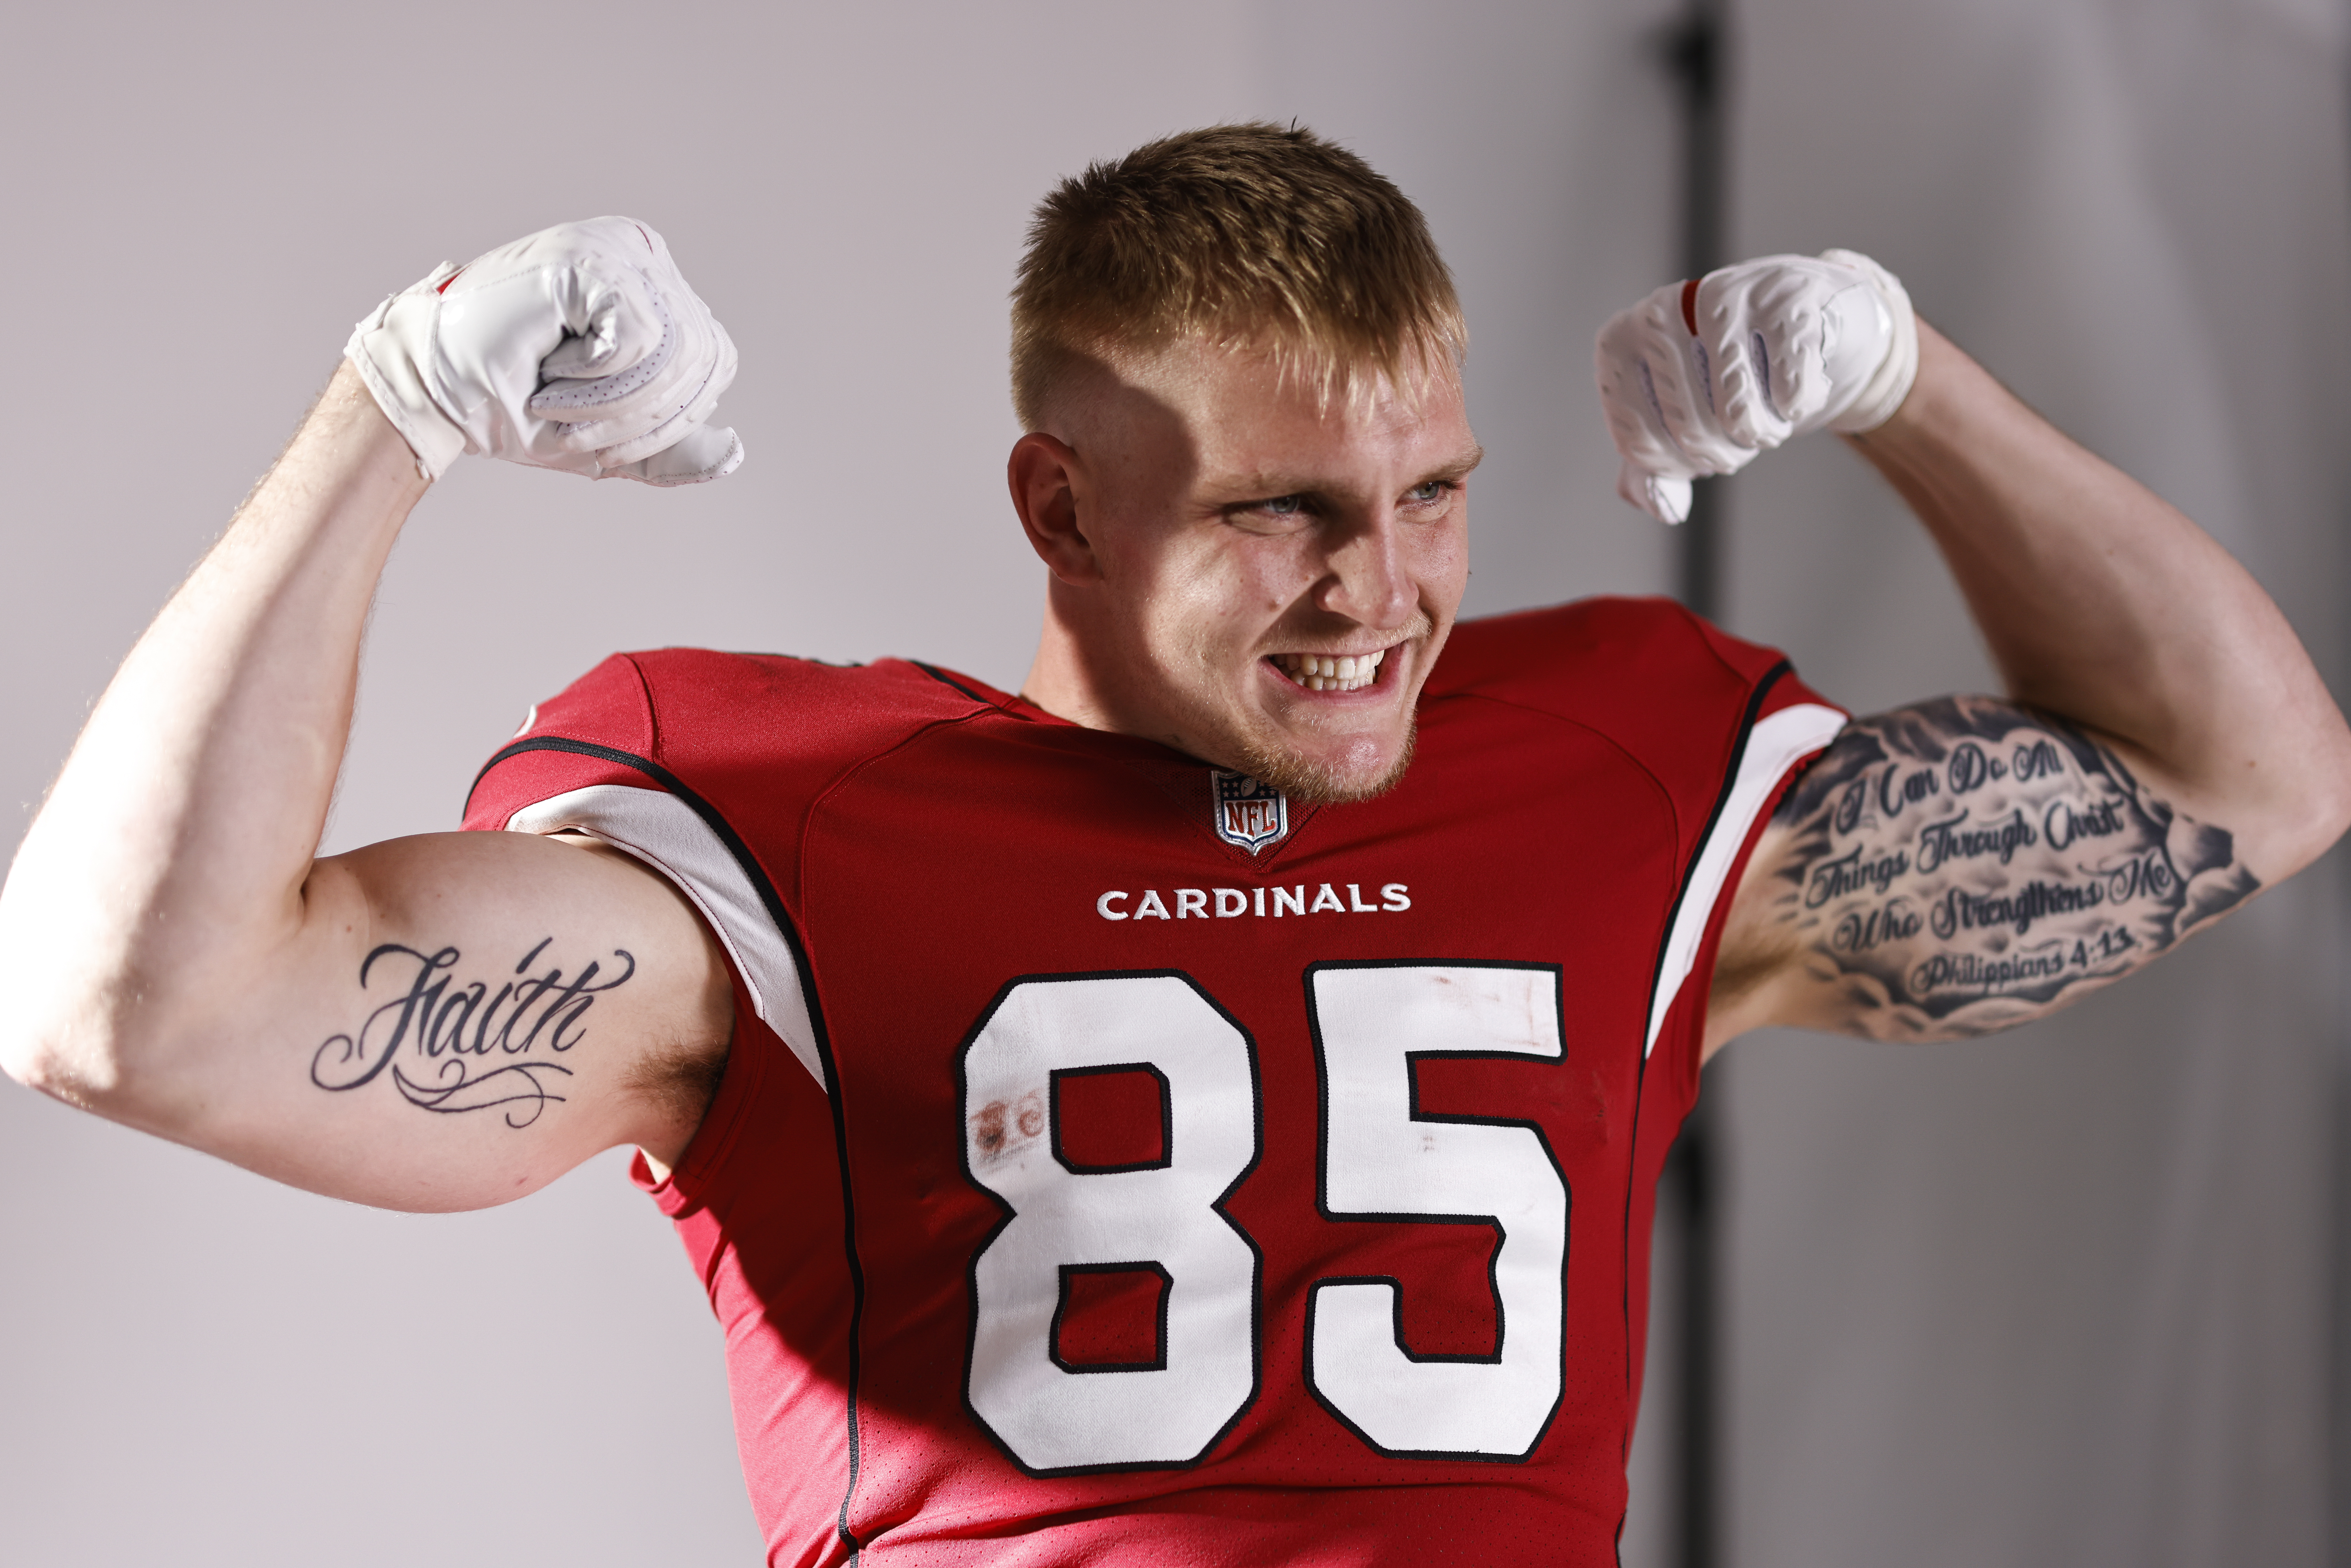 Trey McBride #85 of the Arizona Cardinals poses for a portrait during the NFLPA Rookie Premiere on May 21, 2022 in Los Angeles, California